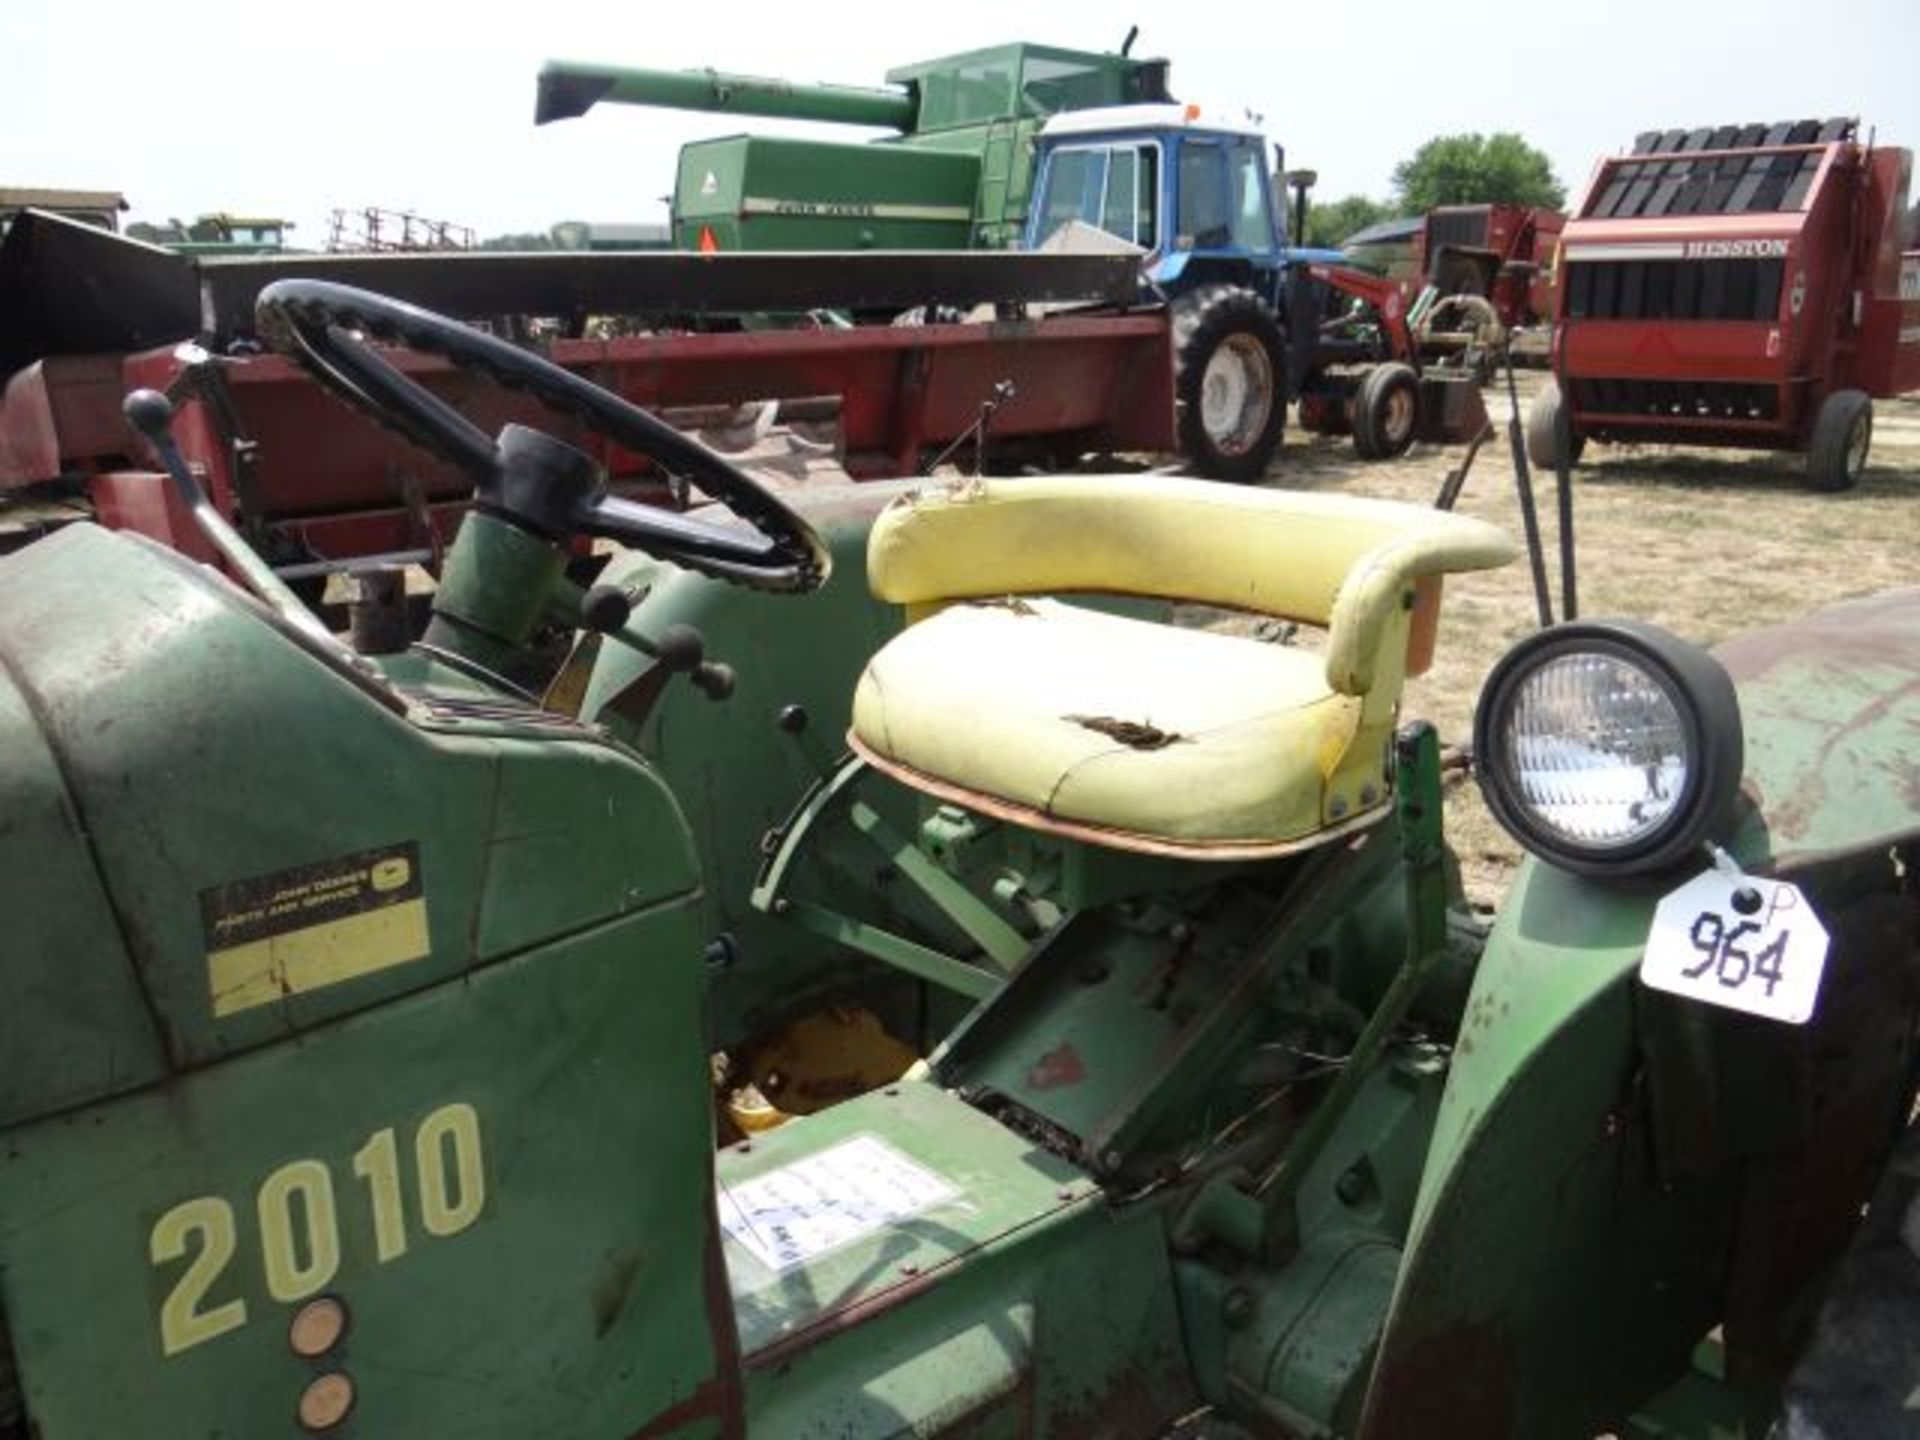 JD 2010 Tractor Gas, 3pt, WF, All Works Good - Image 3 of 4